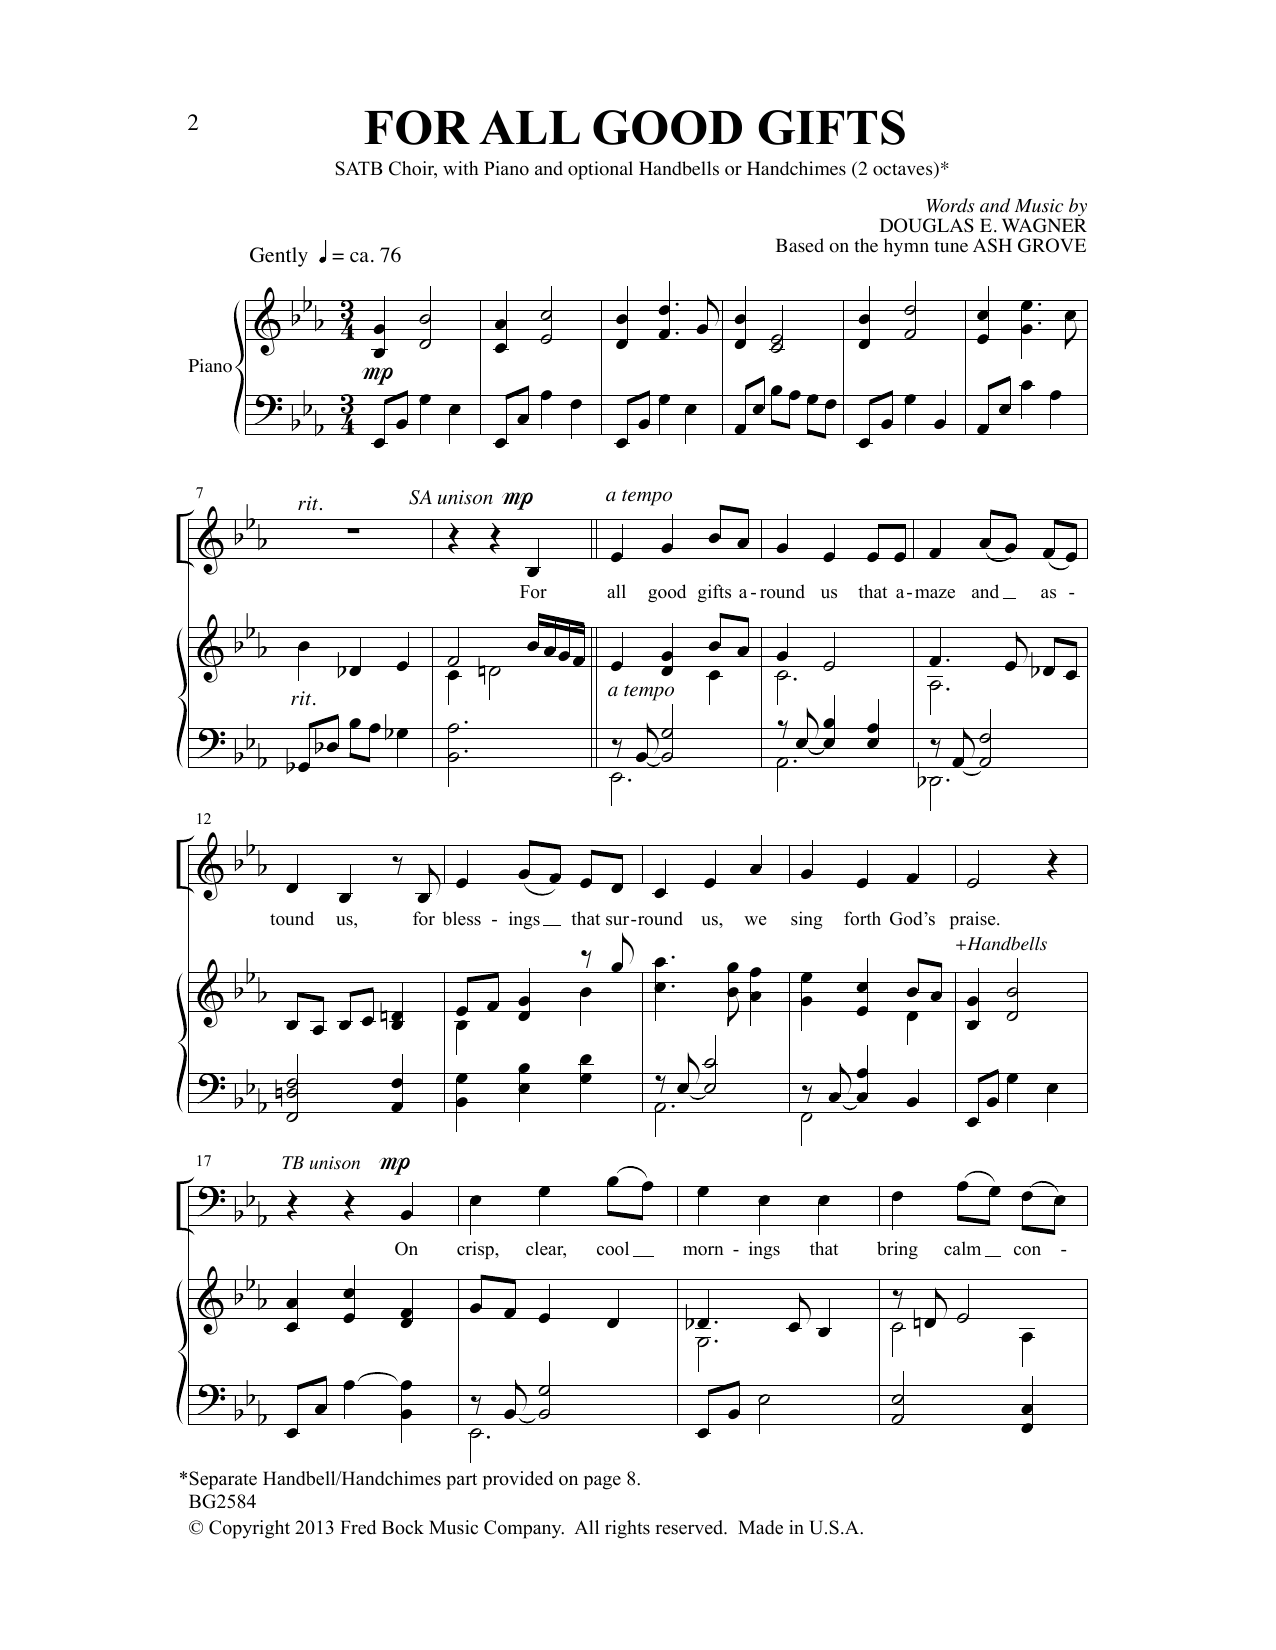 Download Douglas E. Wagner For All Good Gifts Sheet Music